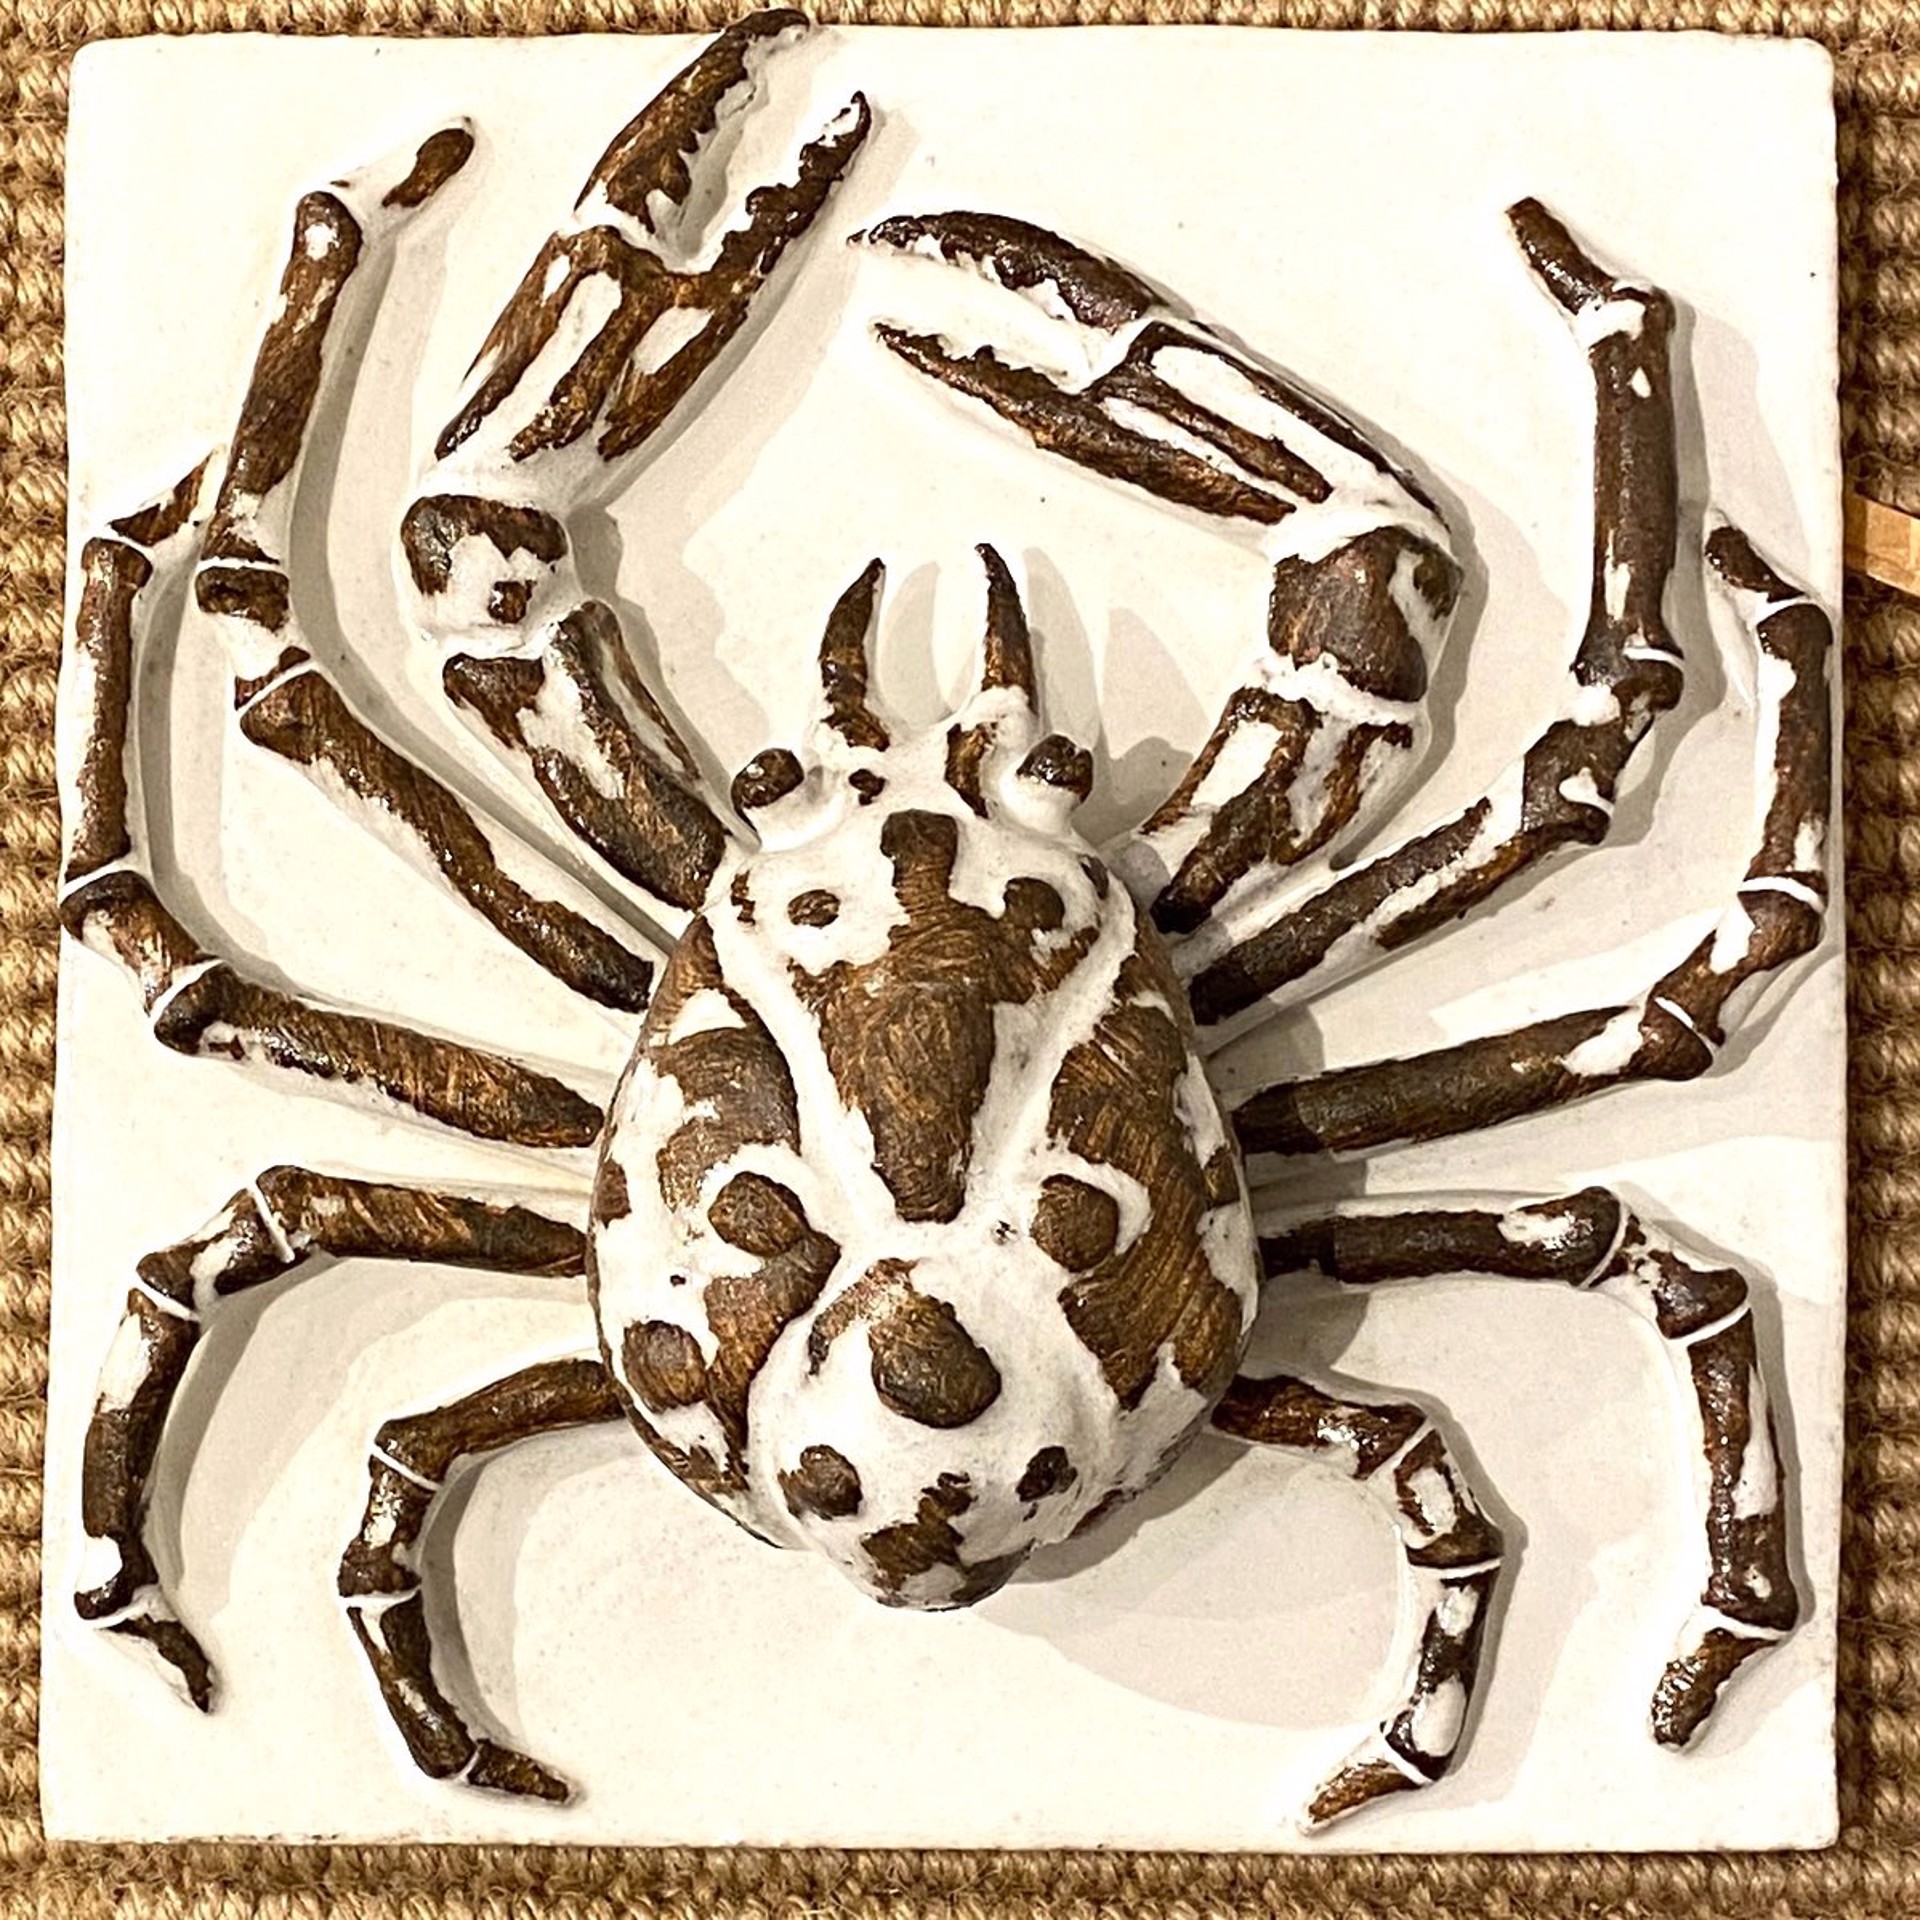 Crab Tile by Shayne Greco